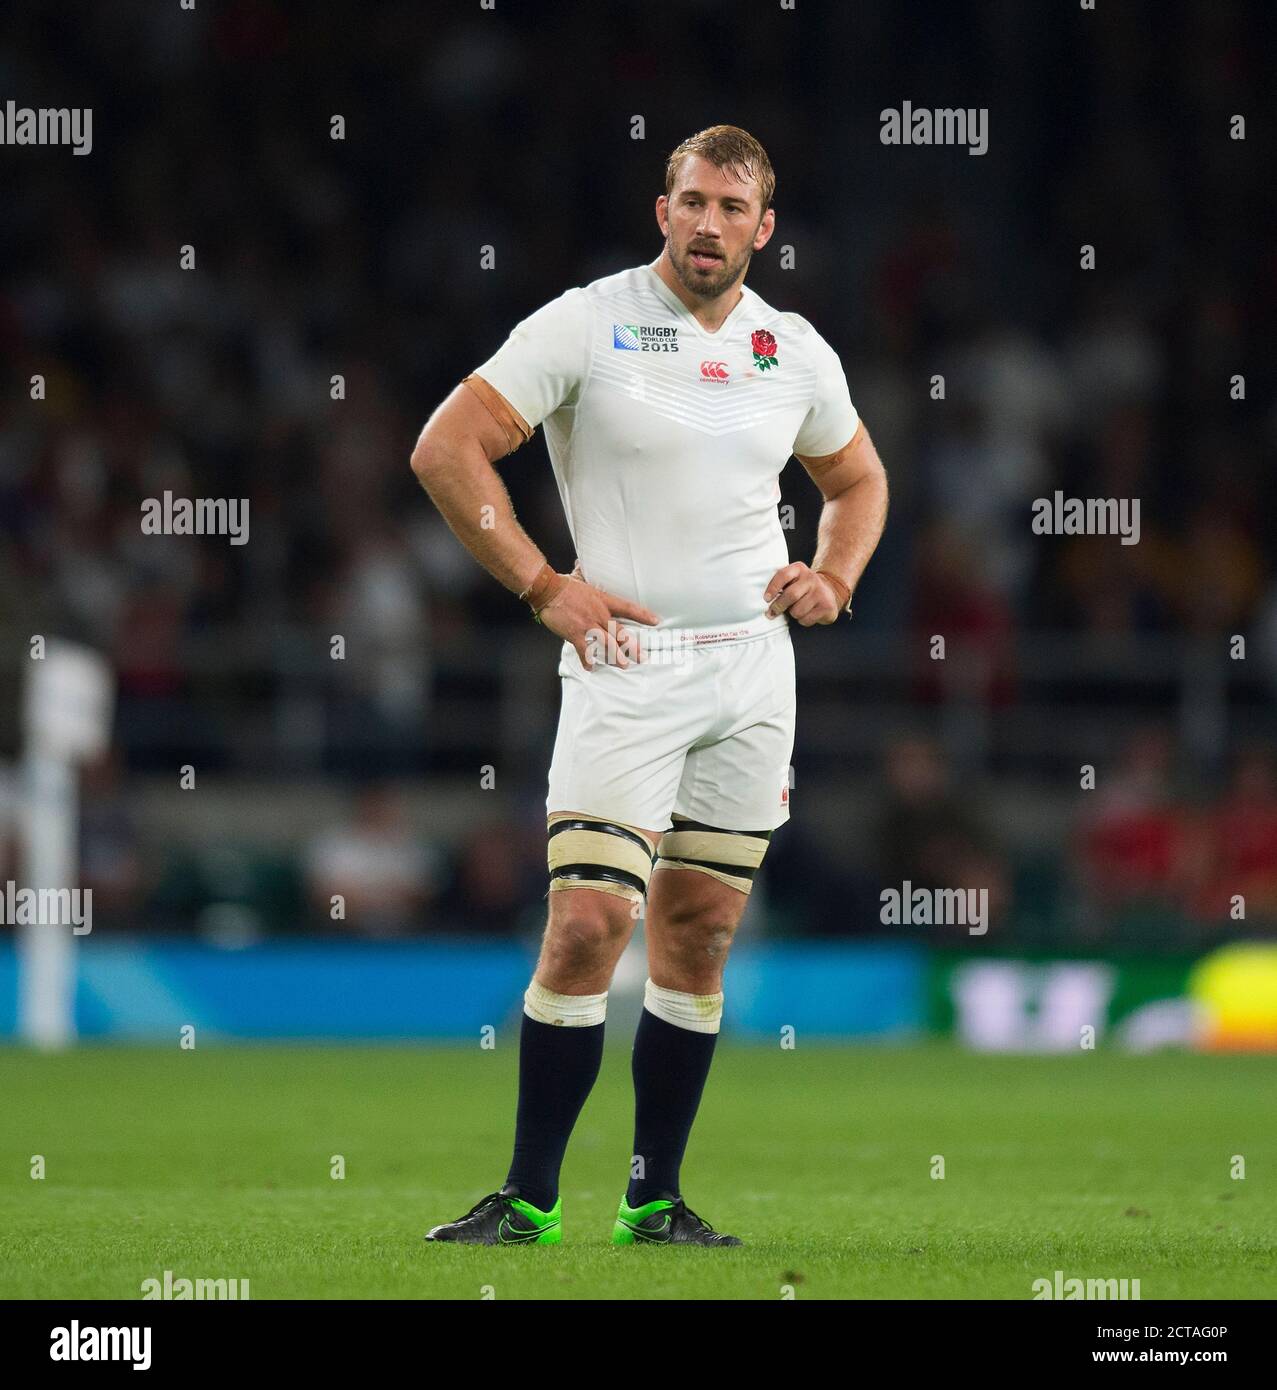 Chris Robbhaw England v Wales Rugby World Cup 2015 Picture Credit : © Mark Pain / Alamy Foto Stock